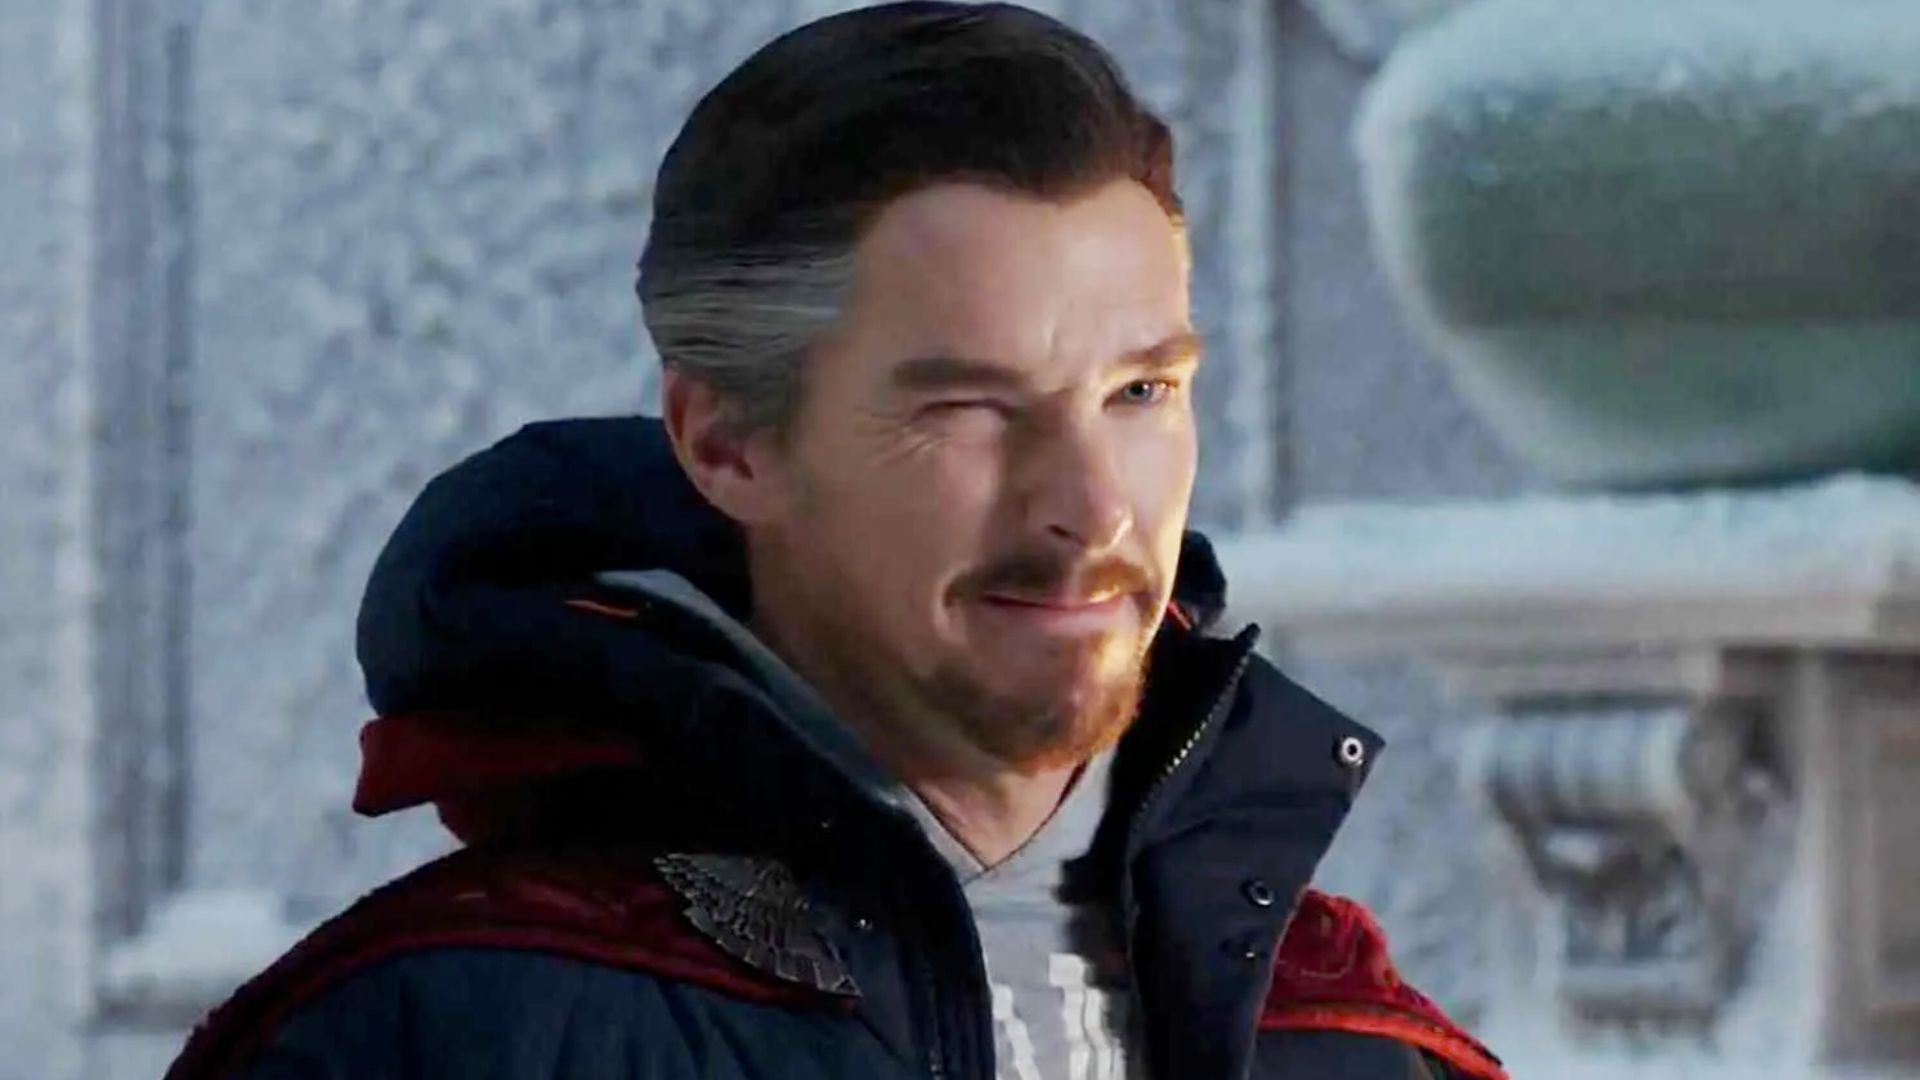 Doctor Strange star Benedict Cumberbatch athlete will be envied by Thor! [FOTO]